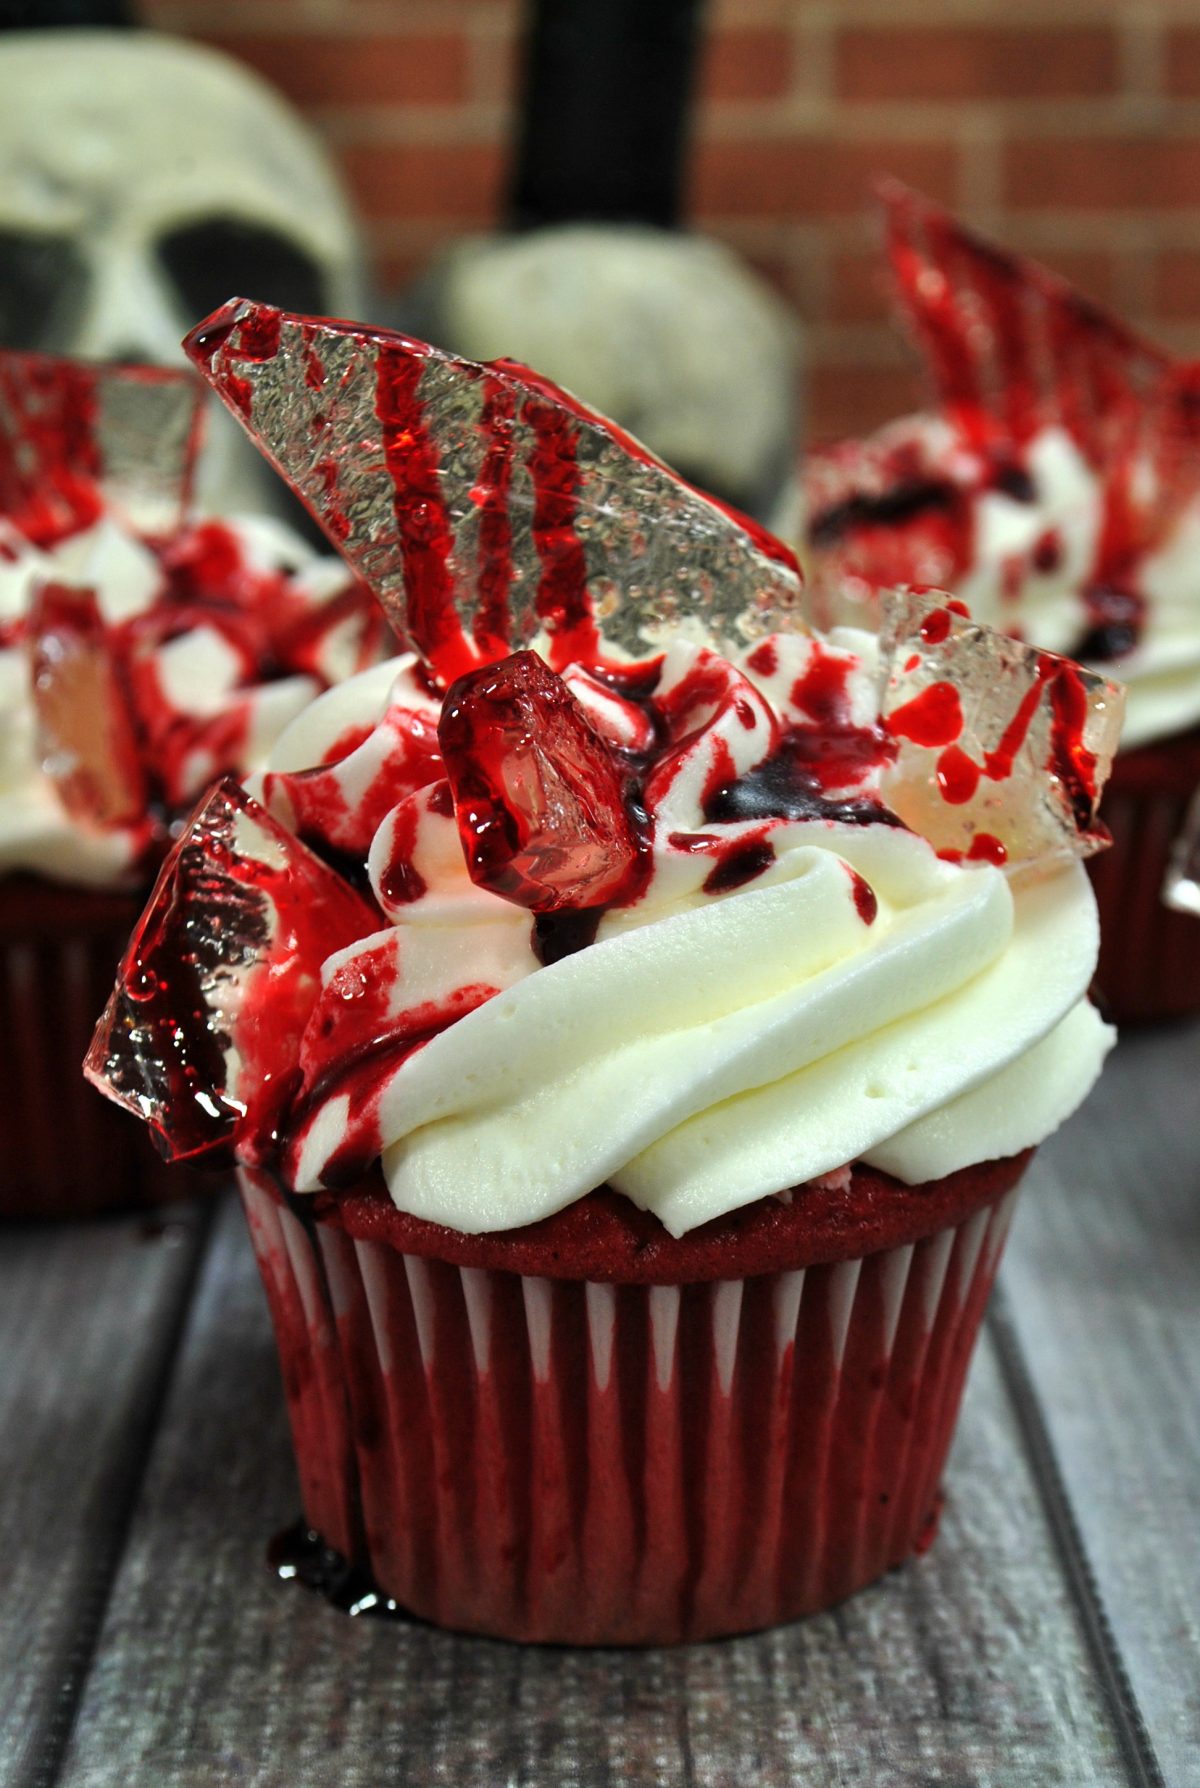 how to make broken glass, how to make sugar glass, broken glass cupcakes, bloody cupcakes, Halloween cupcakes